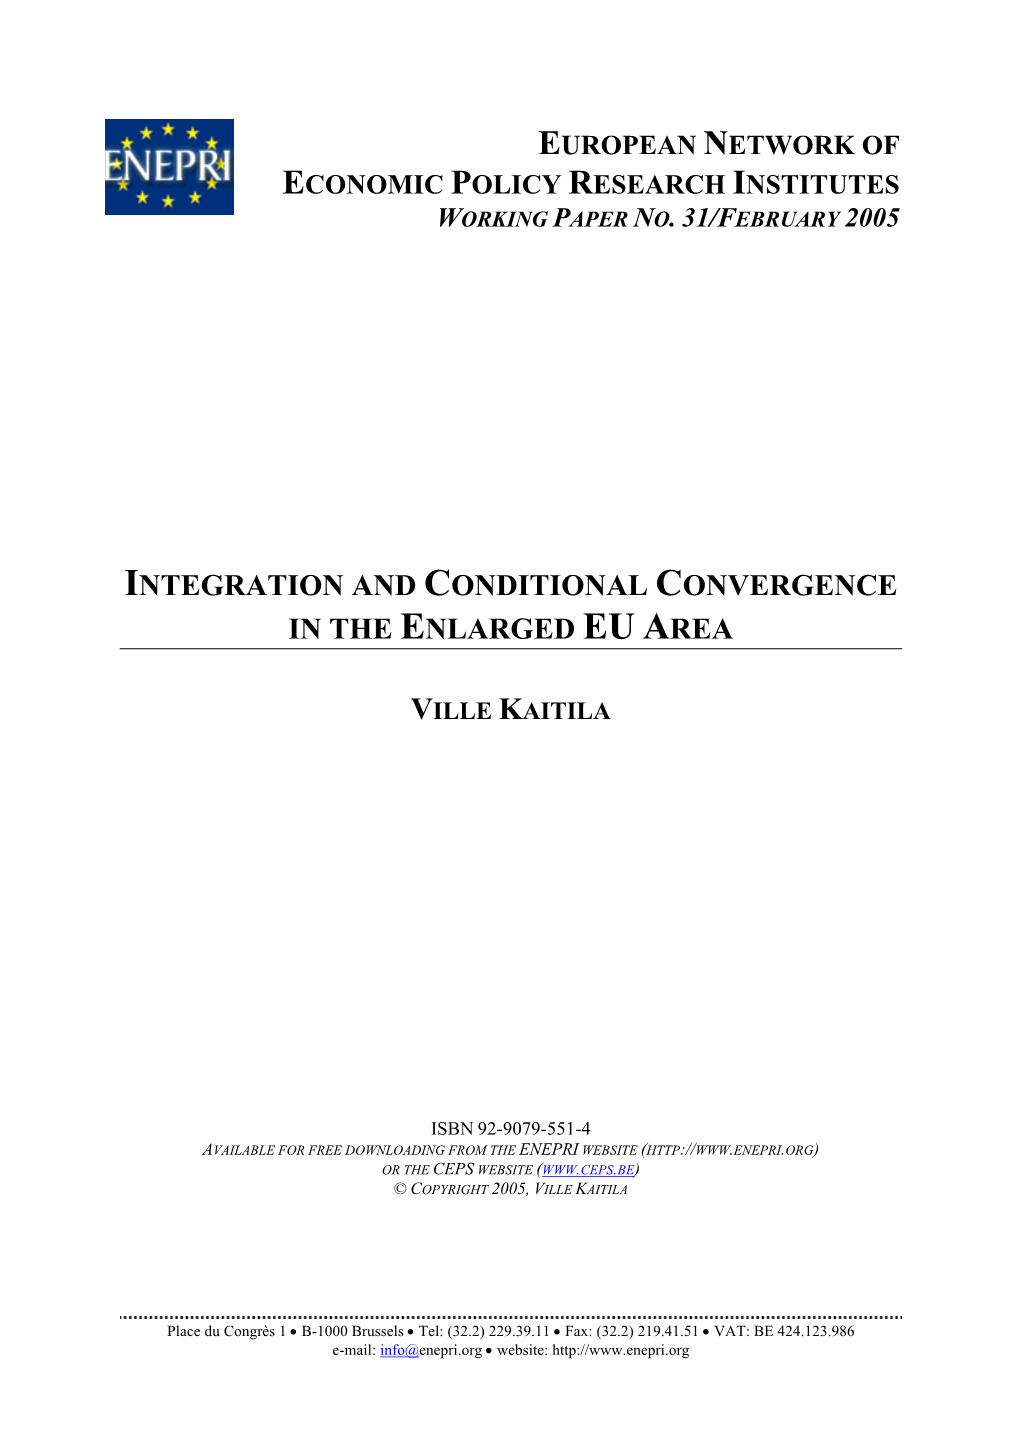 Integration and Conditional Convergence in the Enlarged Eu Area